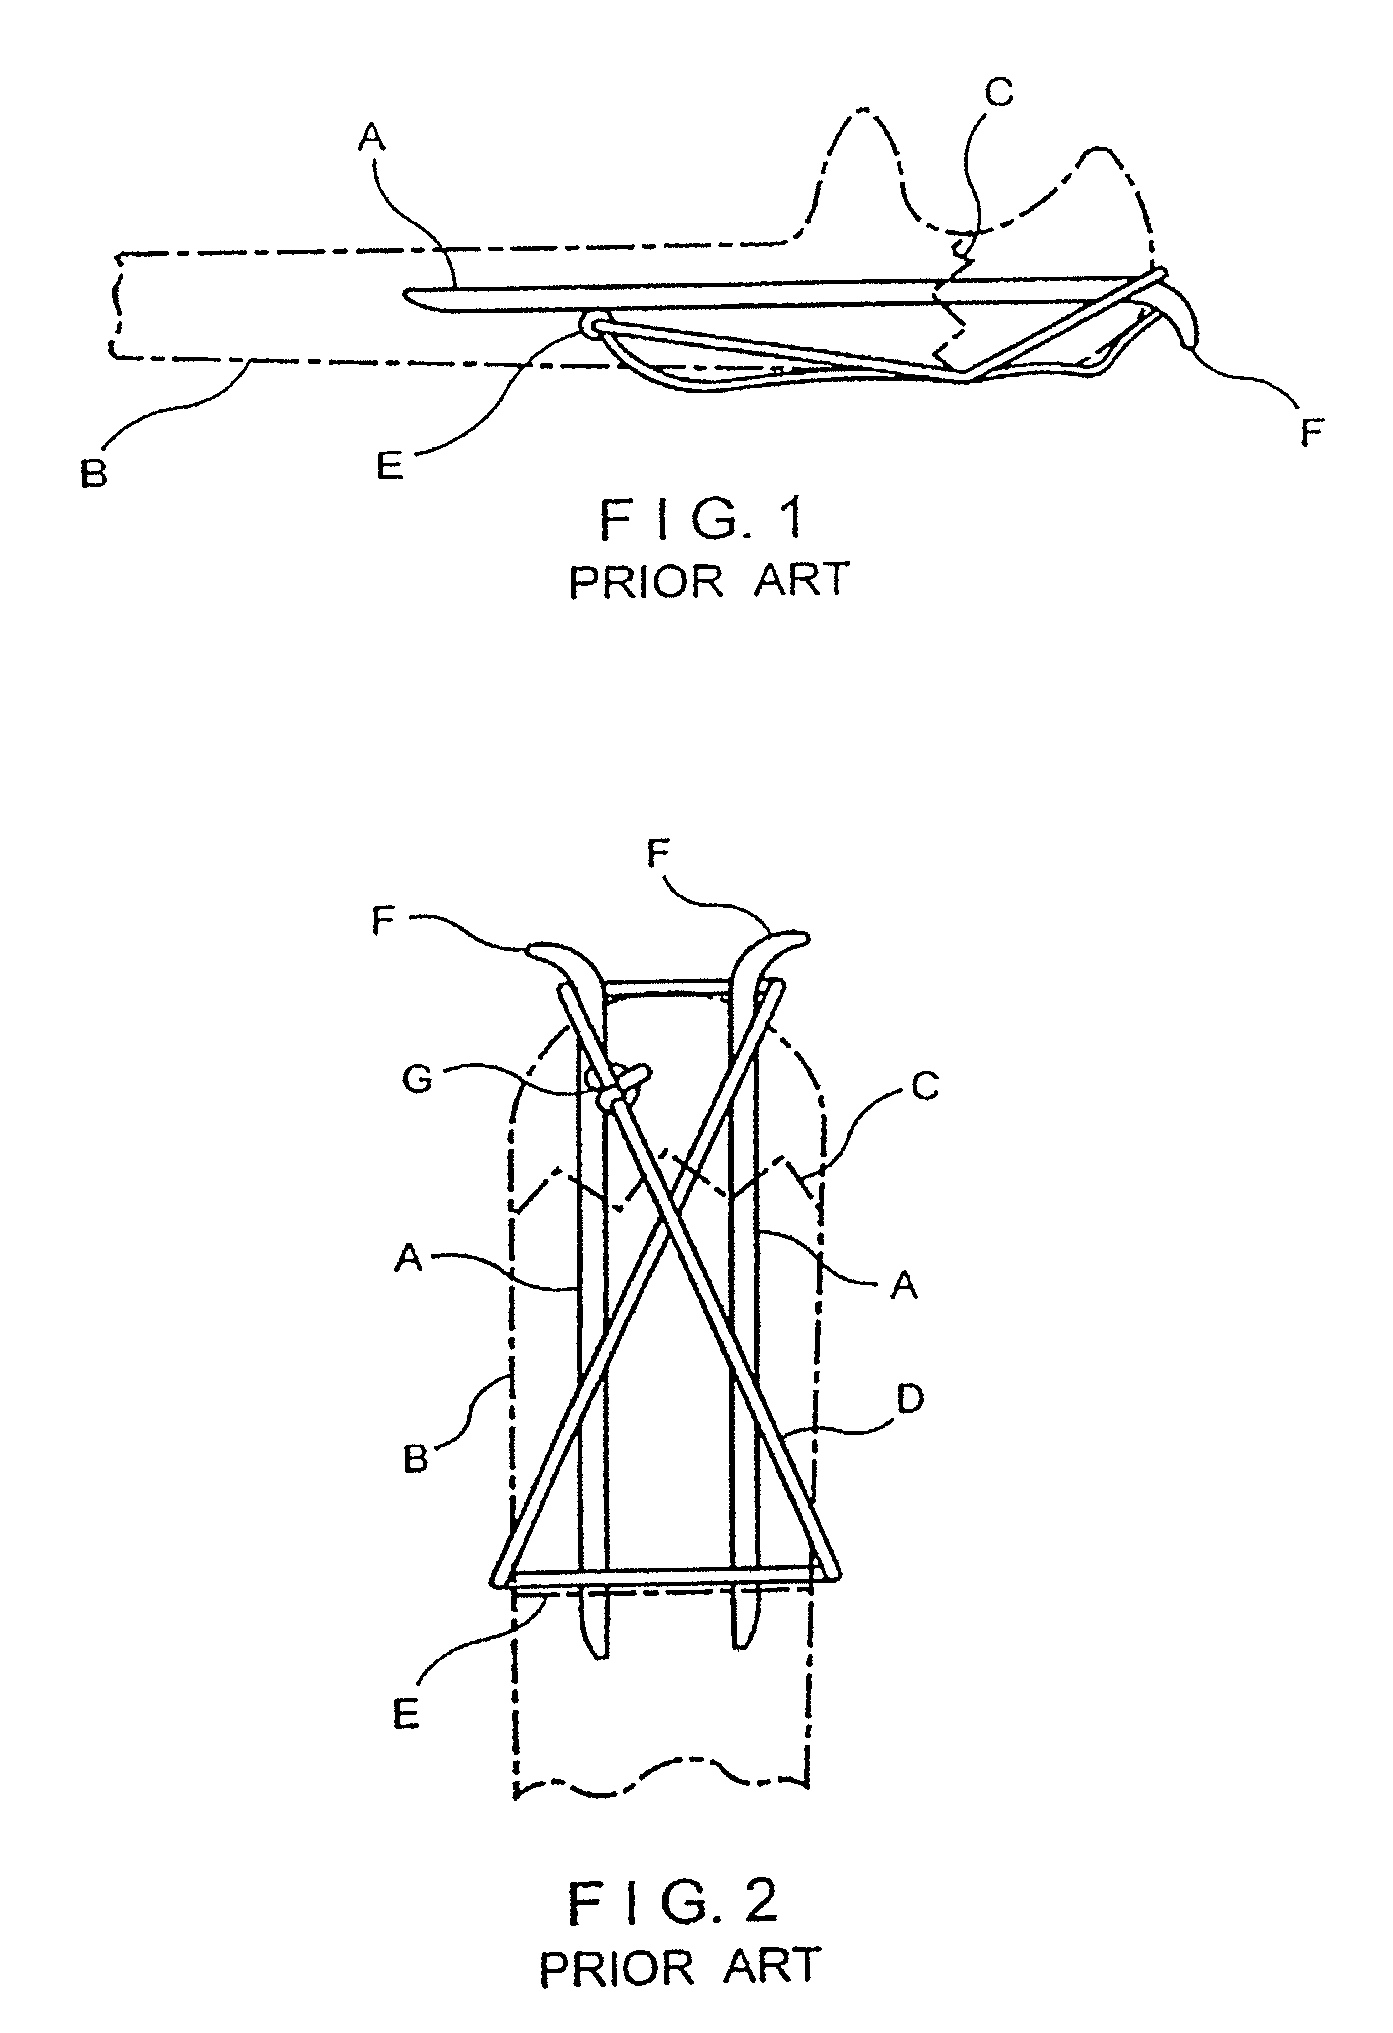 Guide system and associated method for installing an implant device adapted to apply compression across a fracture site